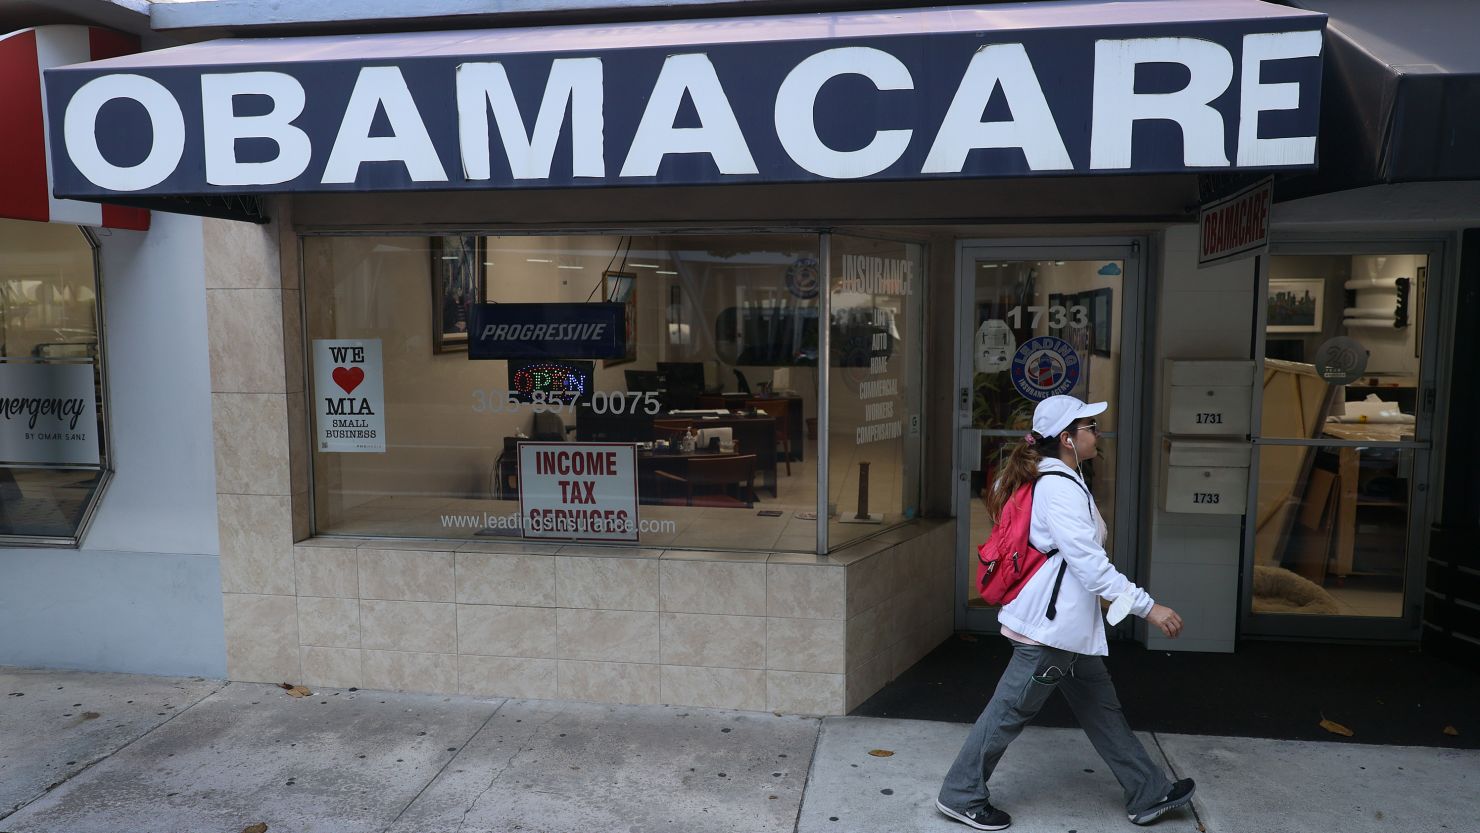 MIAMI, FLORIDA - JANUARY 28: A pedestrian walks past the Leading Insurance Agency, which offers plans under the Affordable Care Act (also known as Obamacare) on January 28, 2021 in Miami, Florida. President Joe Biden signed an executive order to reopen the Affordable Care Act's federal insurance marketplaces from February 15 to May 15. (Photo by Joe Raedle/Getty Images)